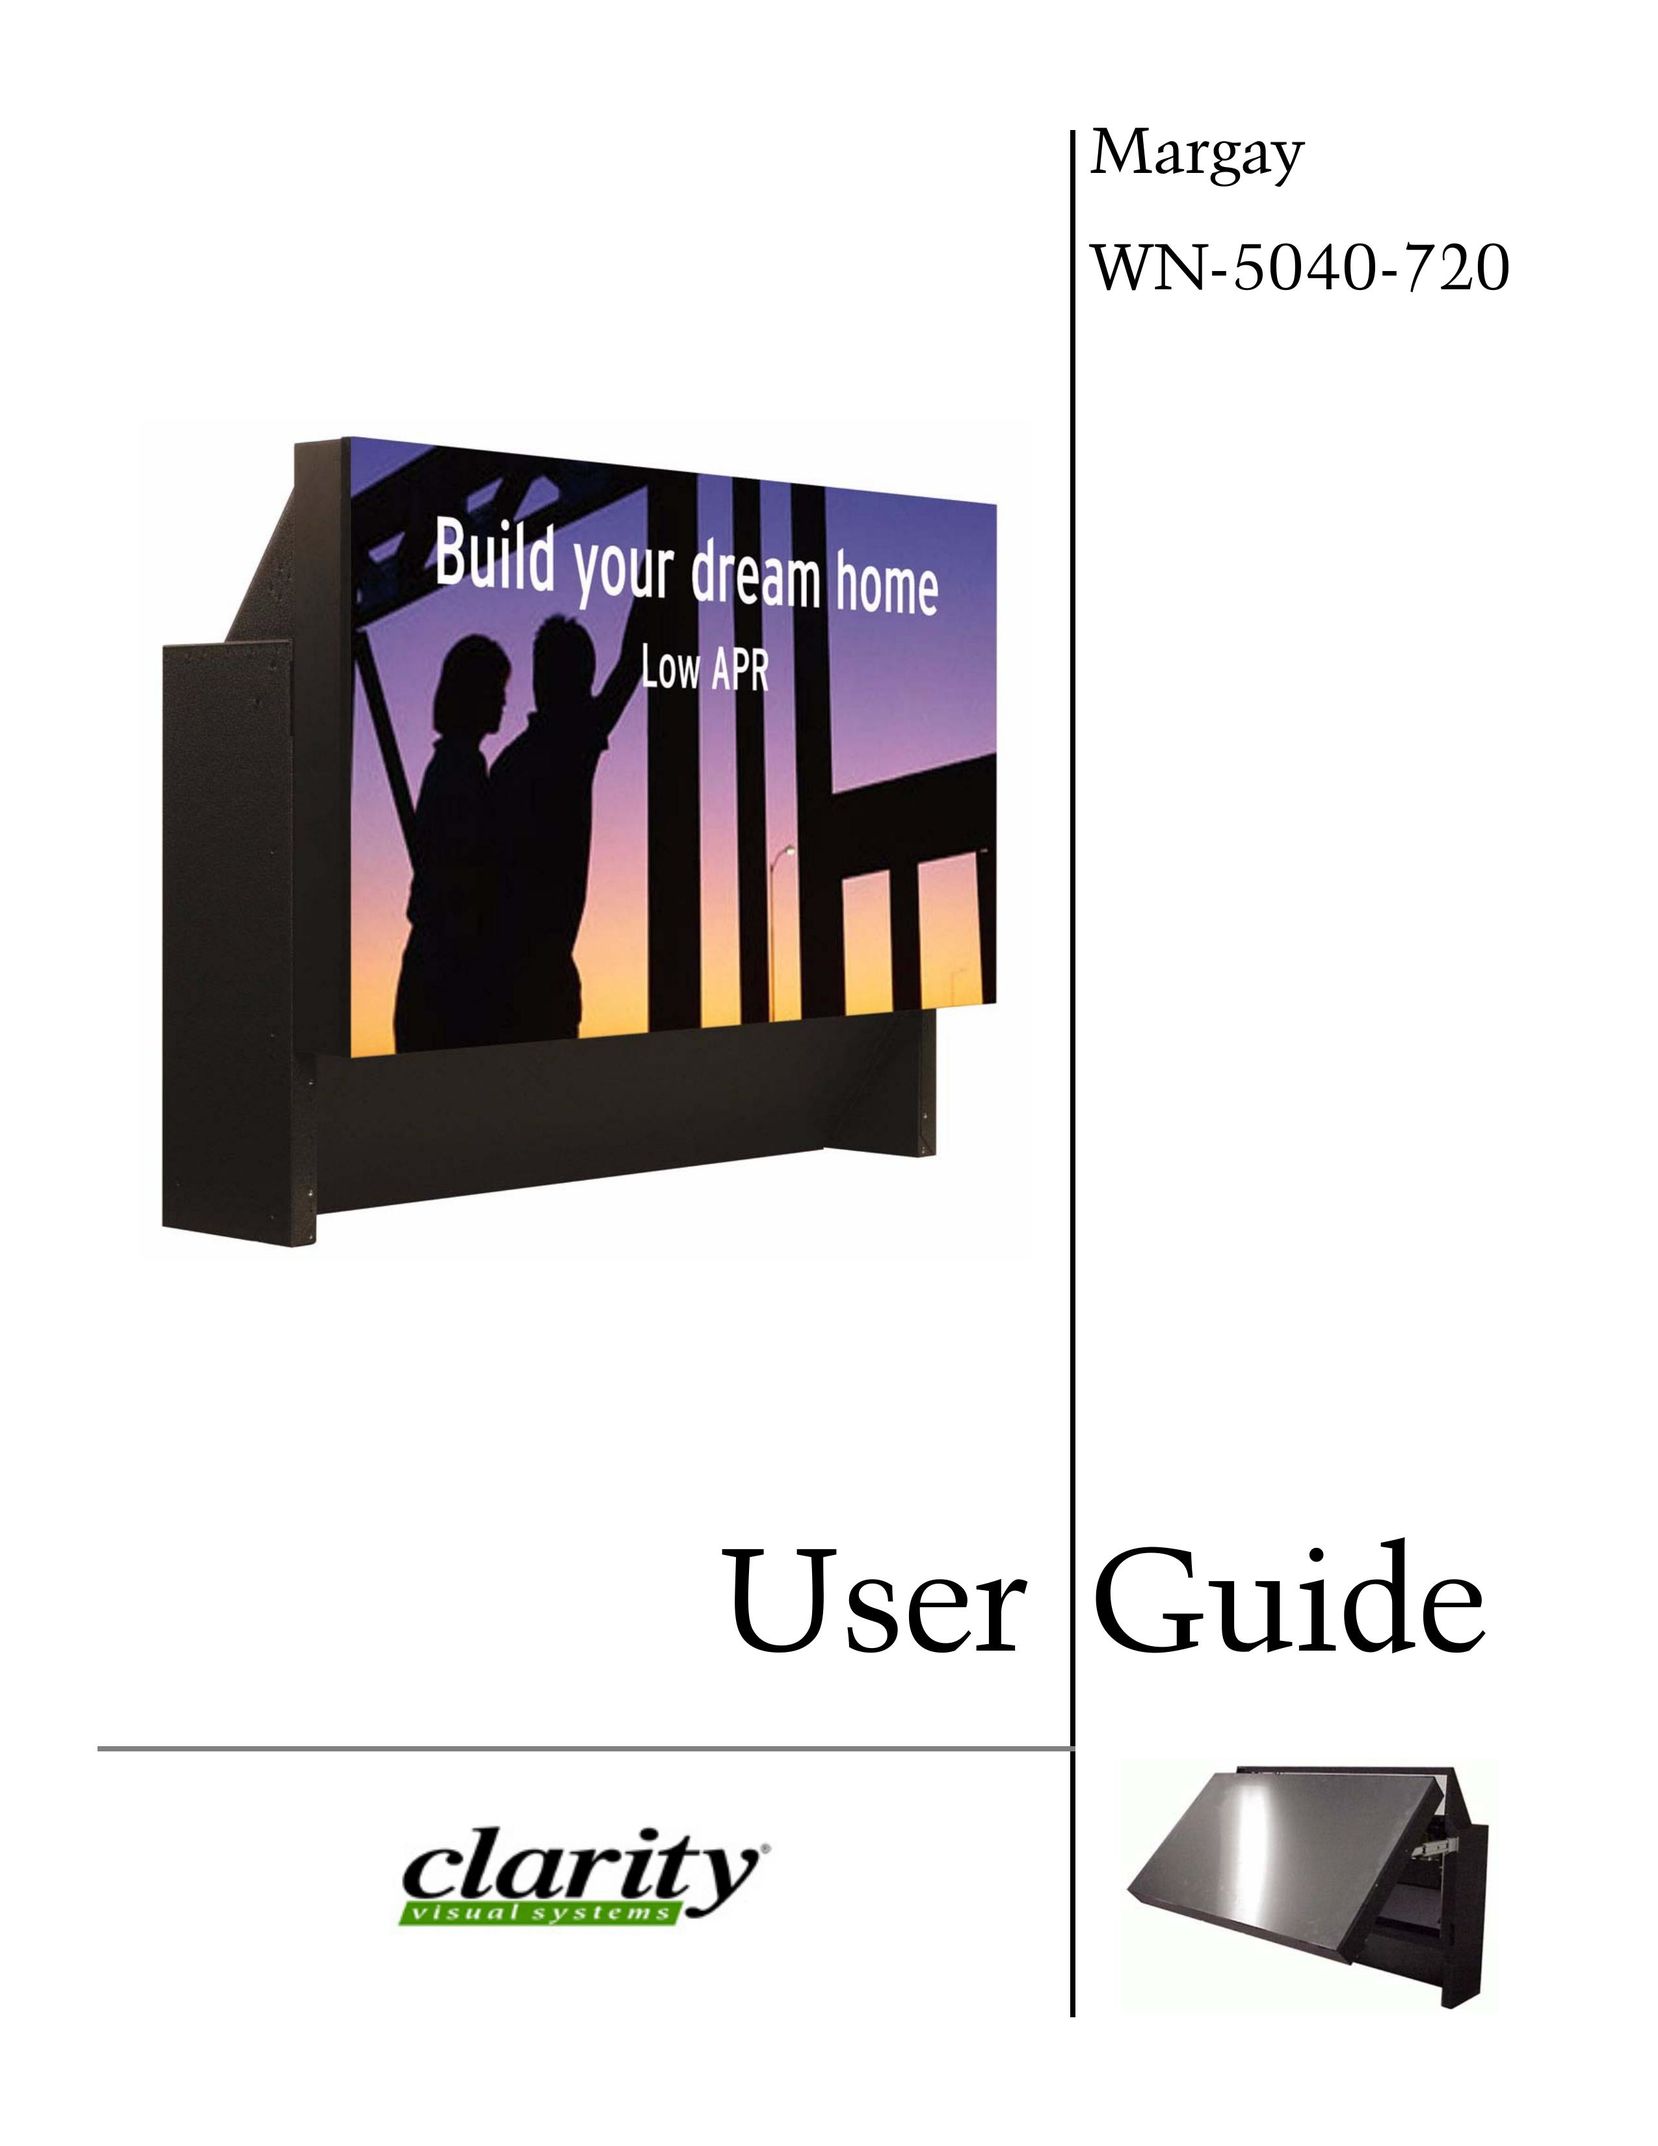 Clarity WN-5040-720 CRT Television User Manual